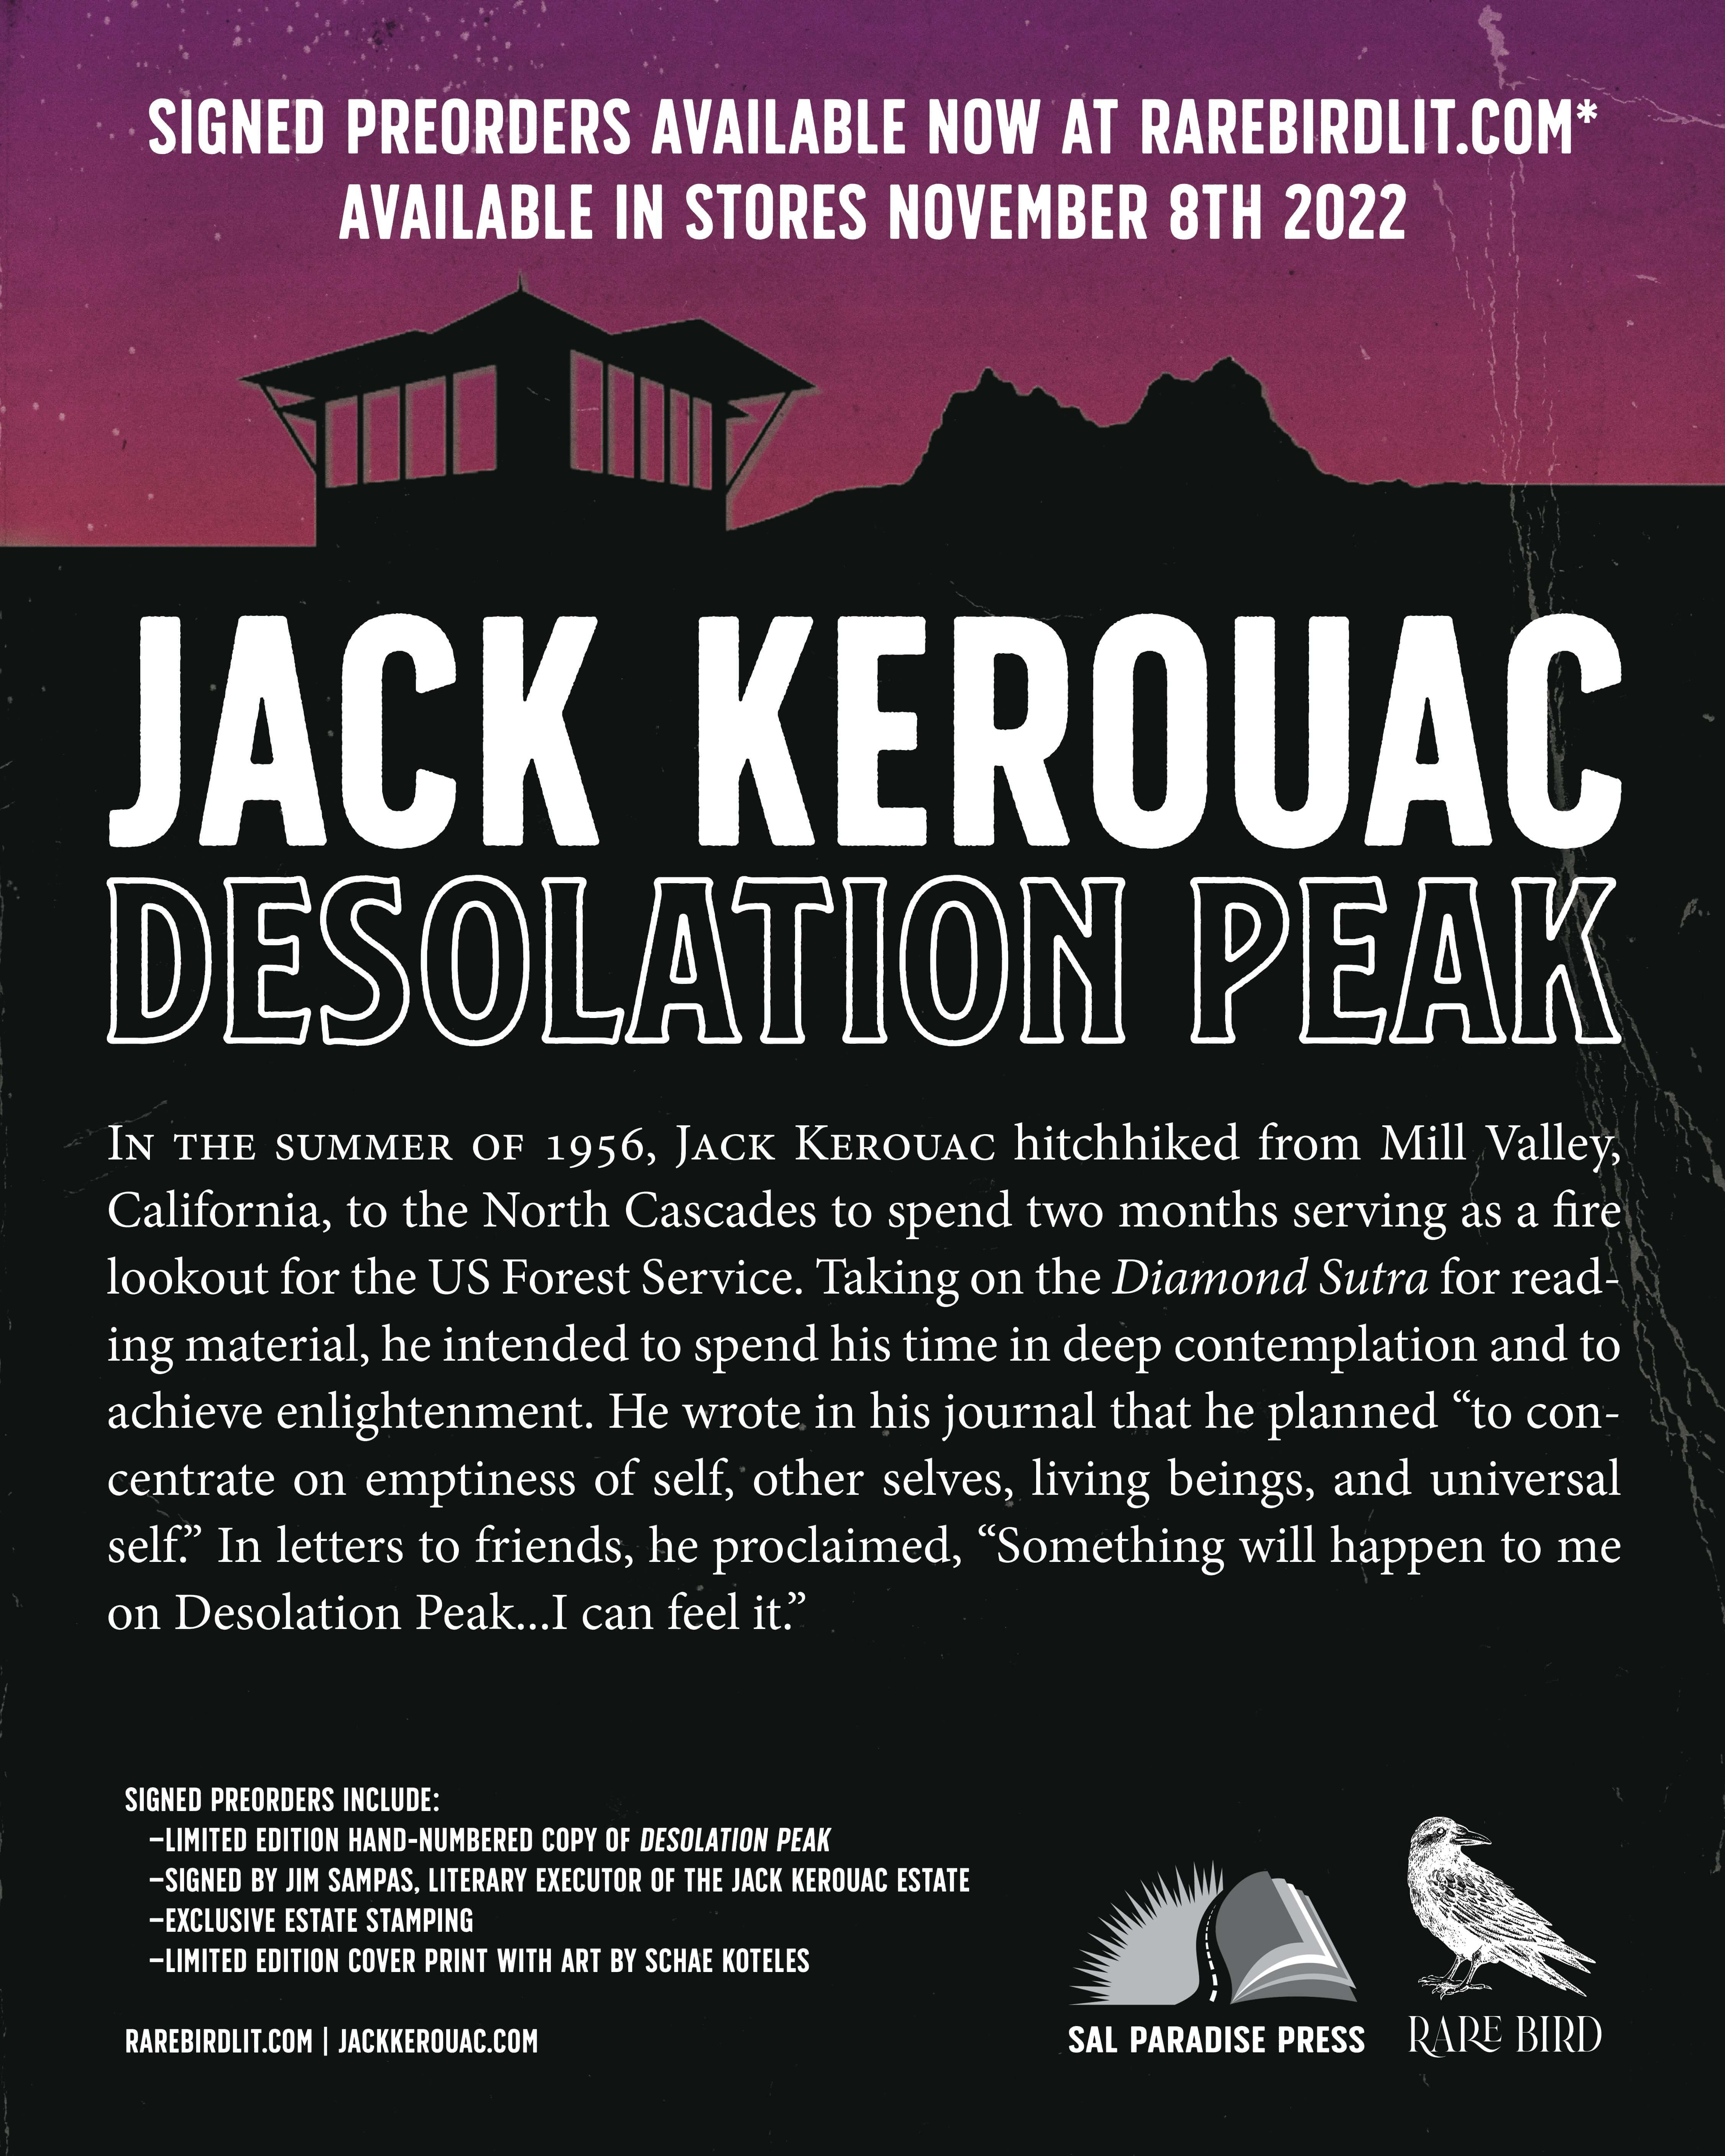 The Jack Kerouac Estate Launches Sal Paradise Press to Co-Publish with Rare Bird, Including New Deluxe Hardcover of Desolation Peak, Featuring Previously Unpublished Writing and Archival Materials by Legendary Beat Generation Jack Kerouac